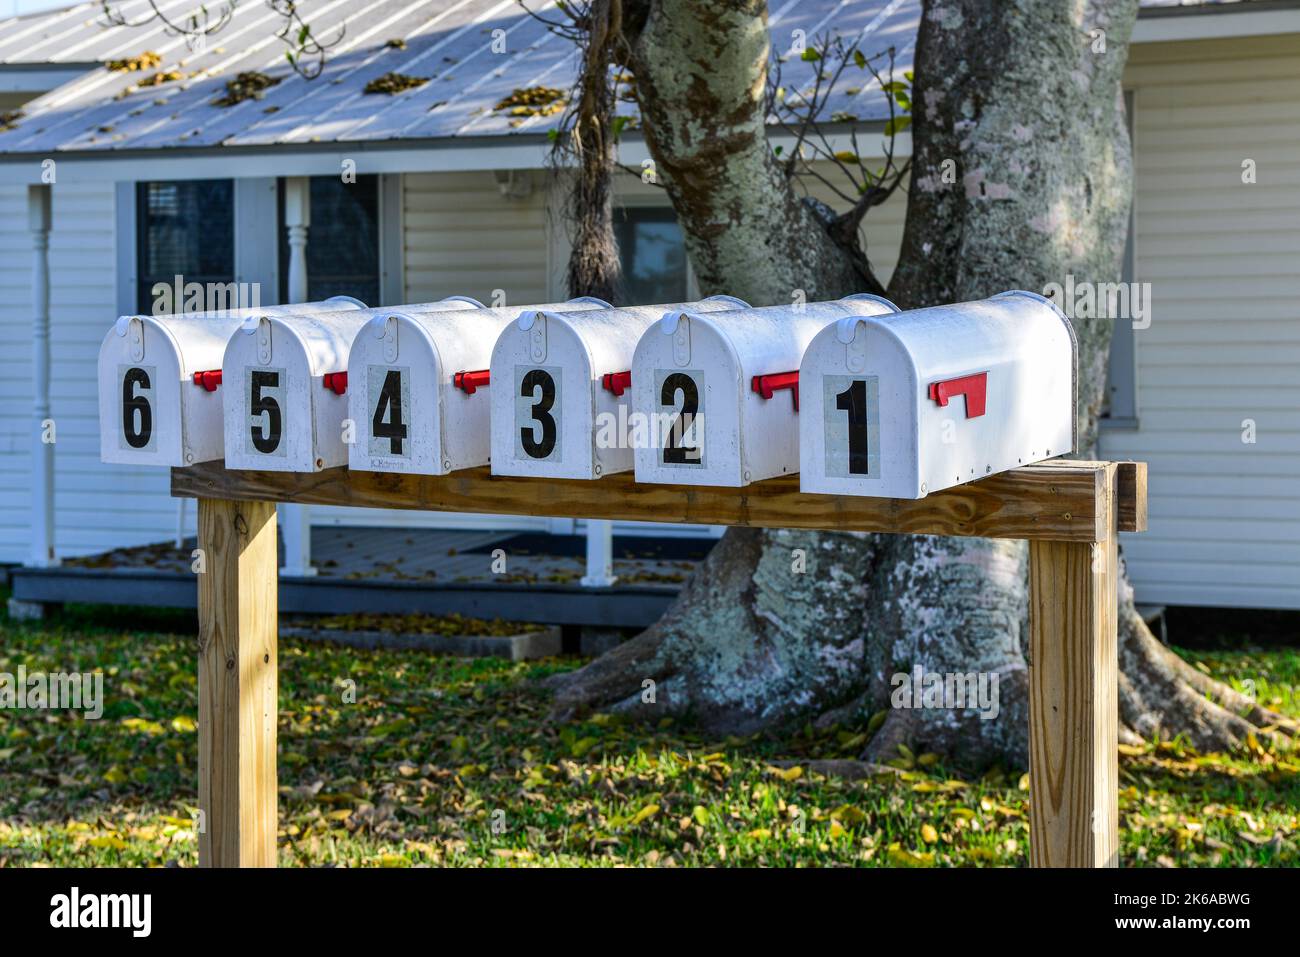 A simplistic yet graphic presentation of six identical mailboxes in a row with homemade wooden stand, and large numerals one through six in Bokeelia, Stock Photo